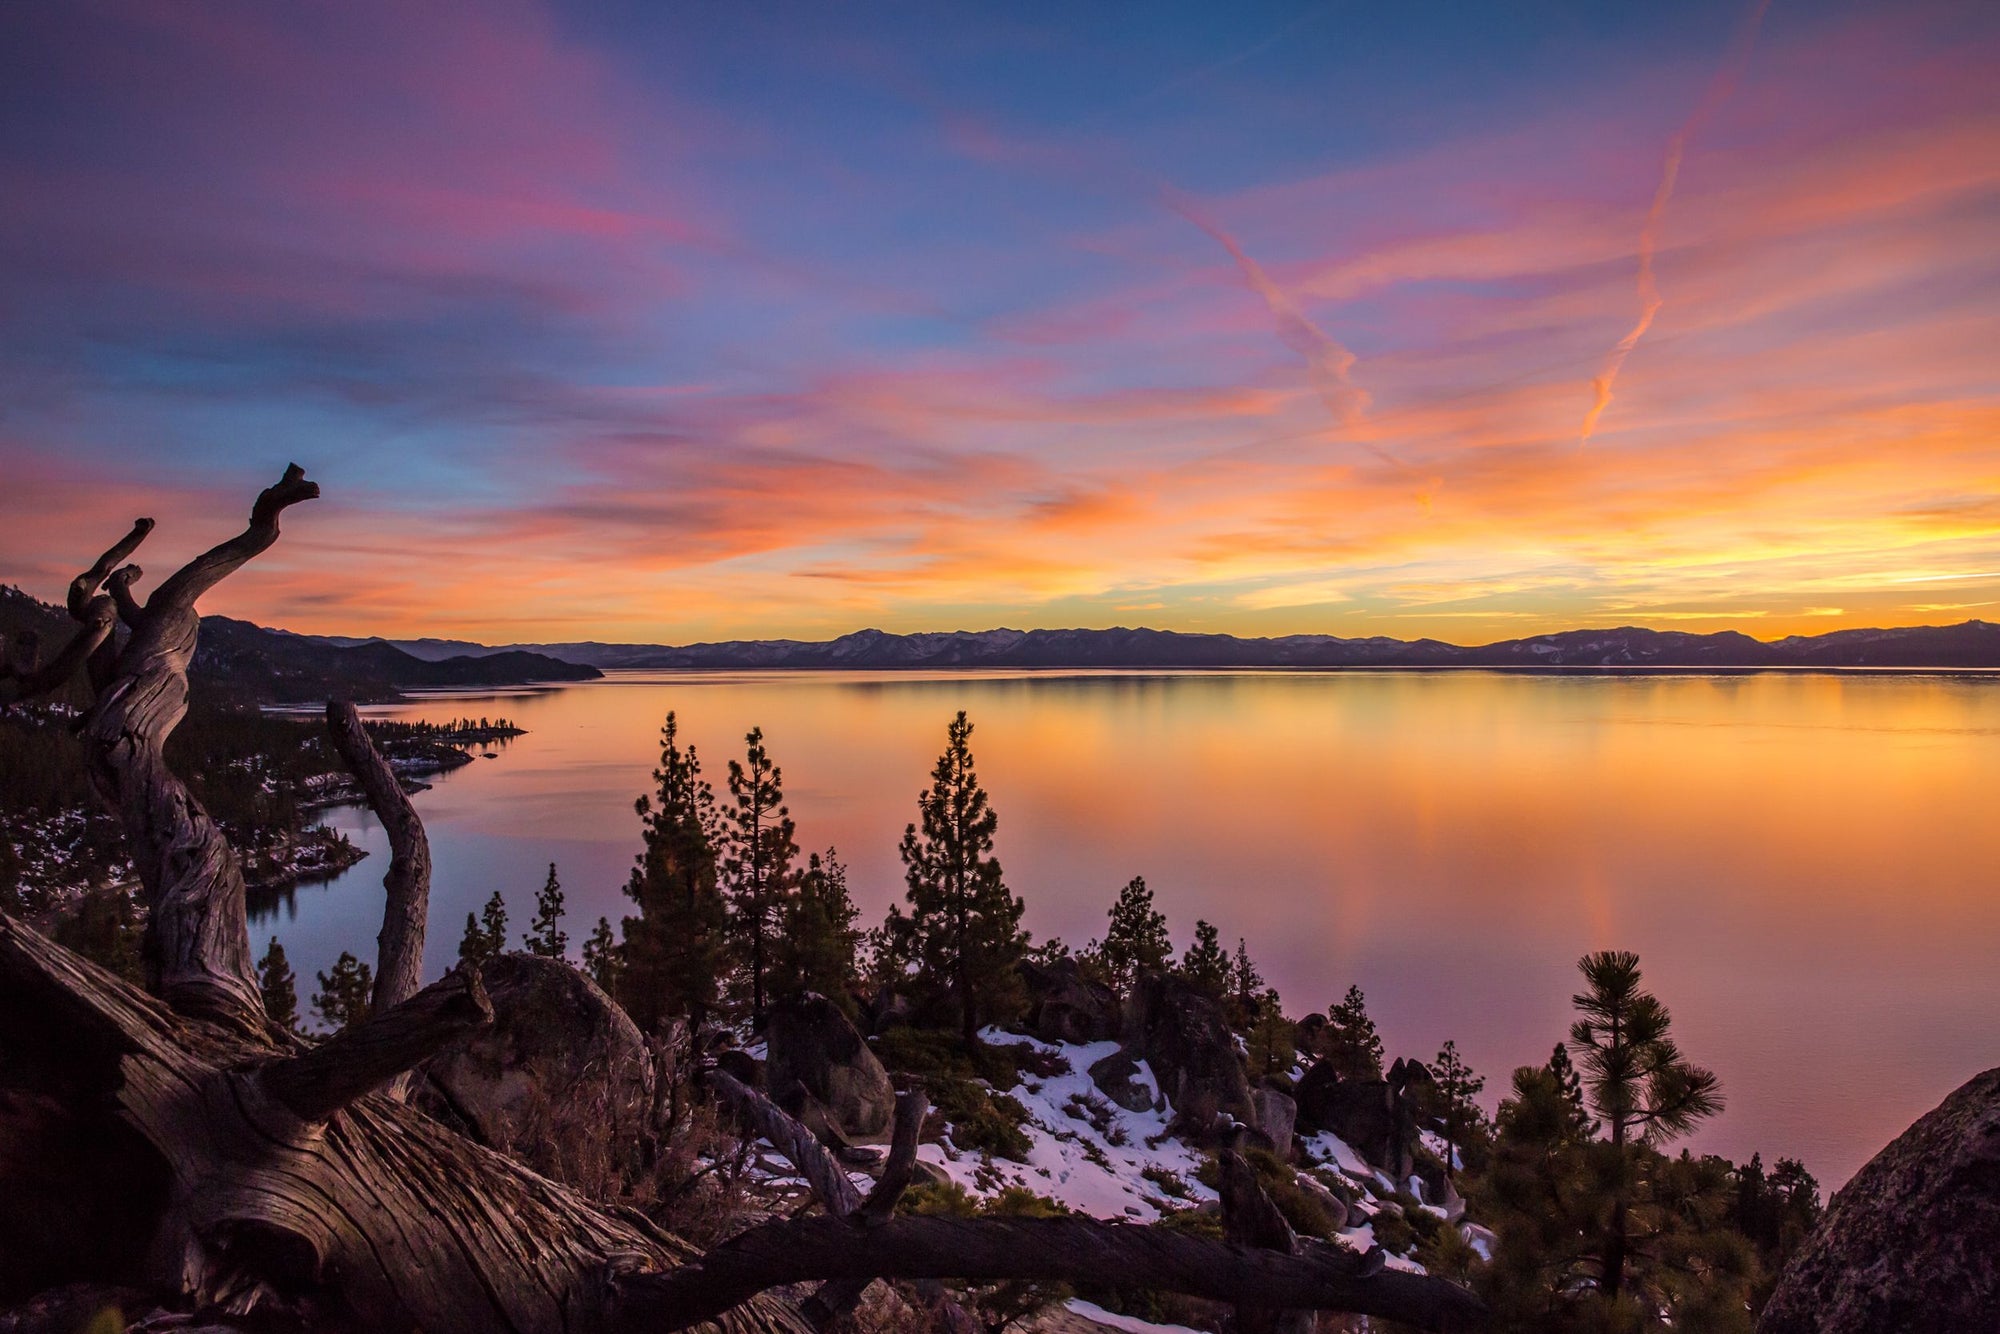 A cotton candy colored sunset above Lake Tahoe.